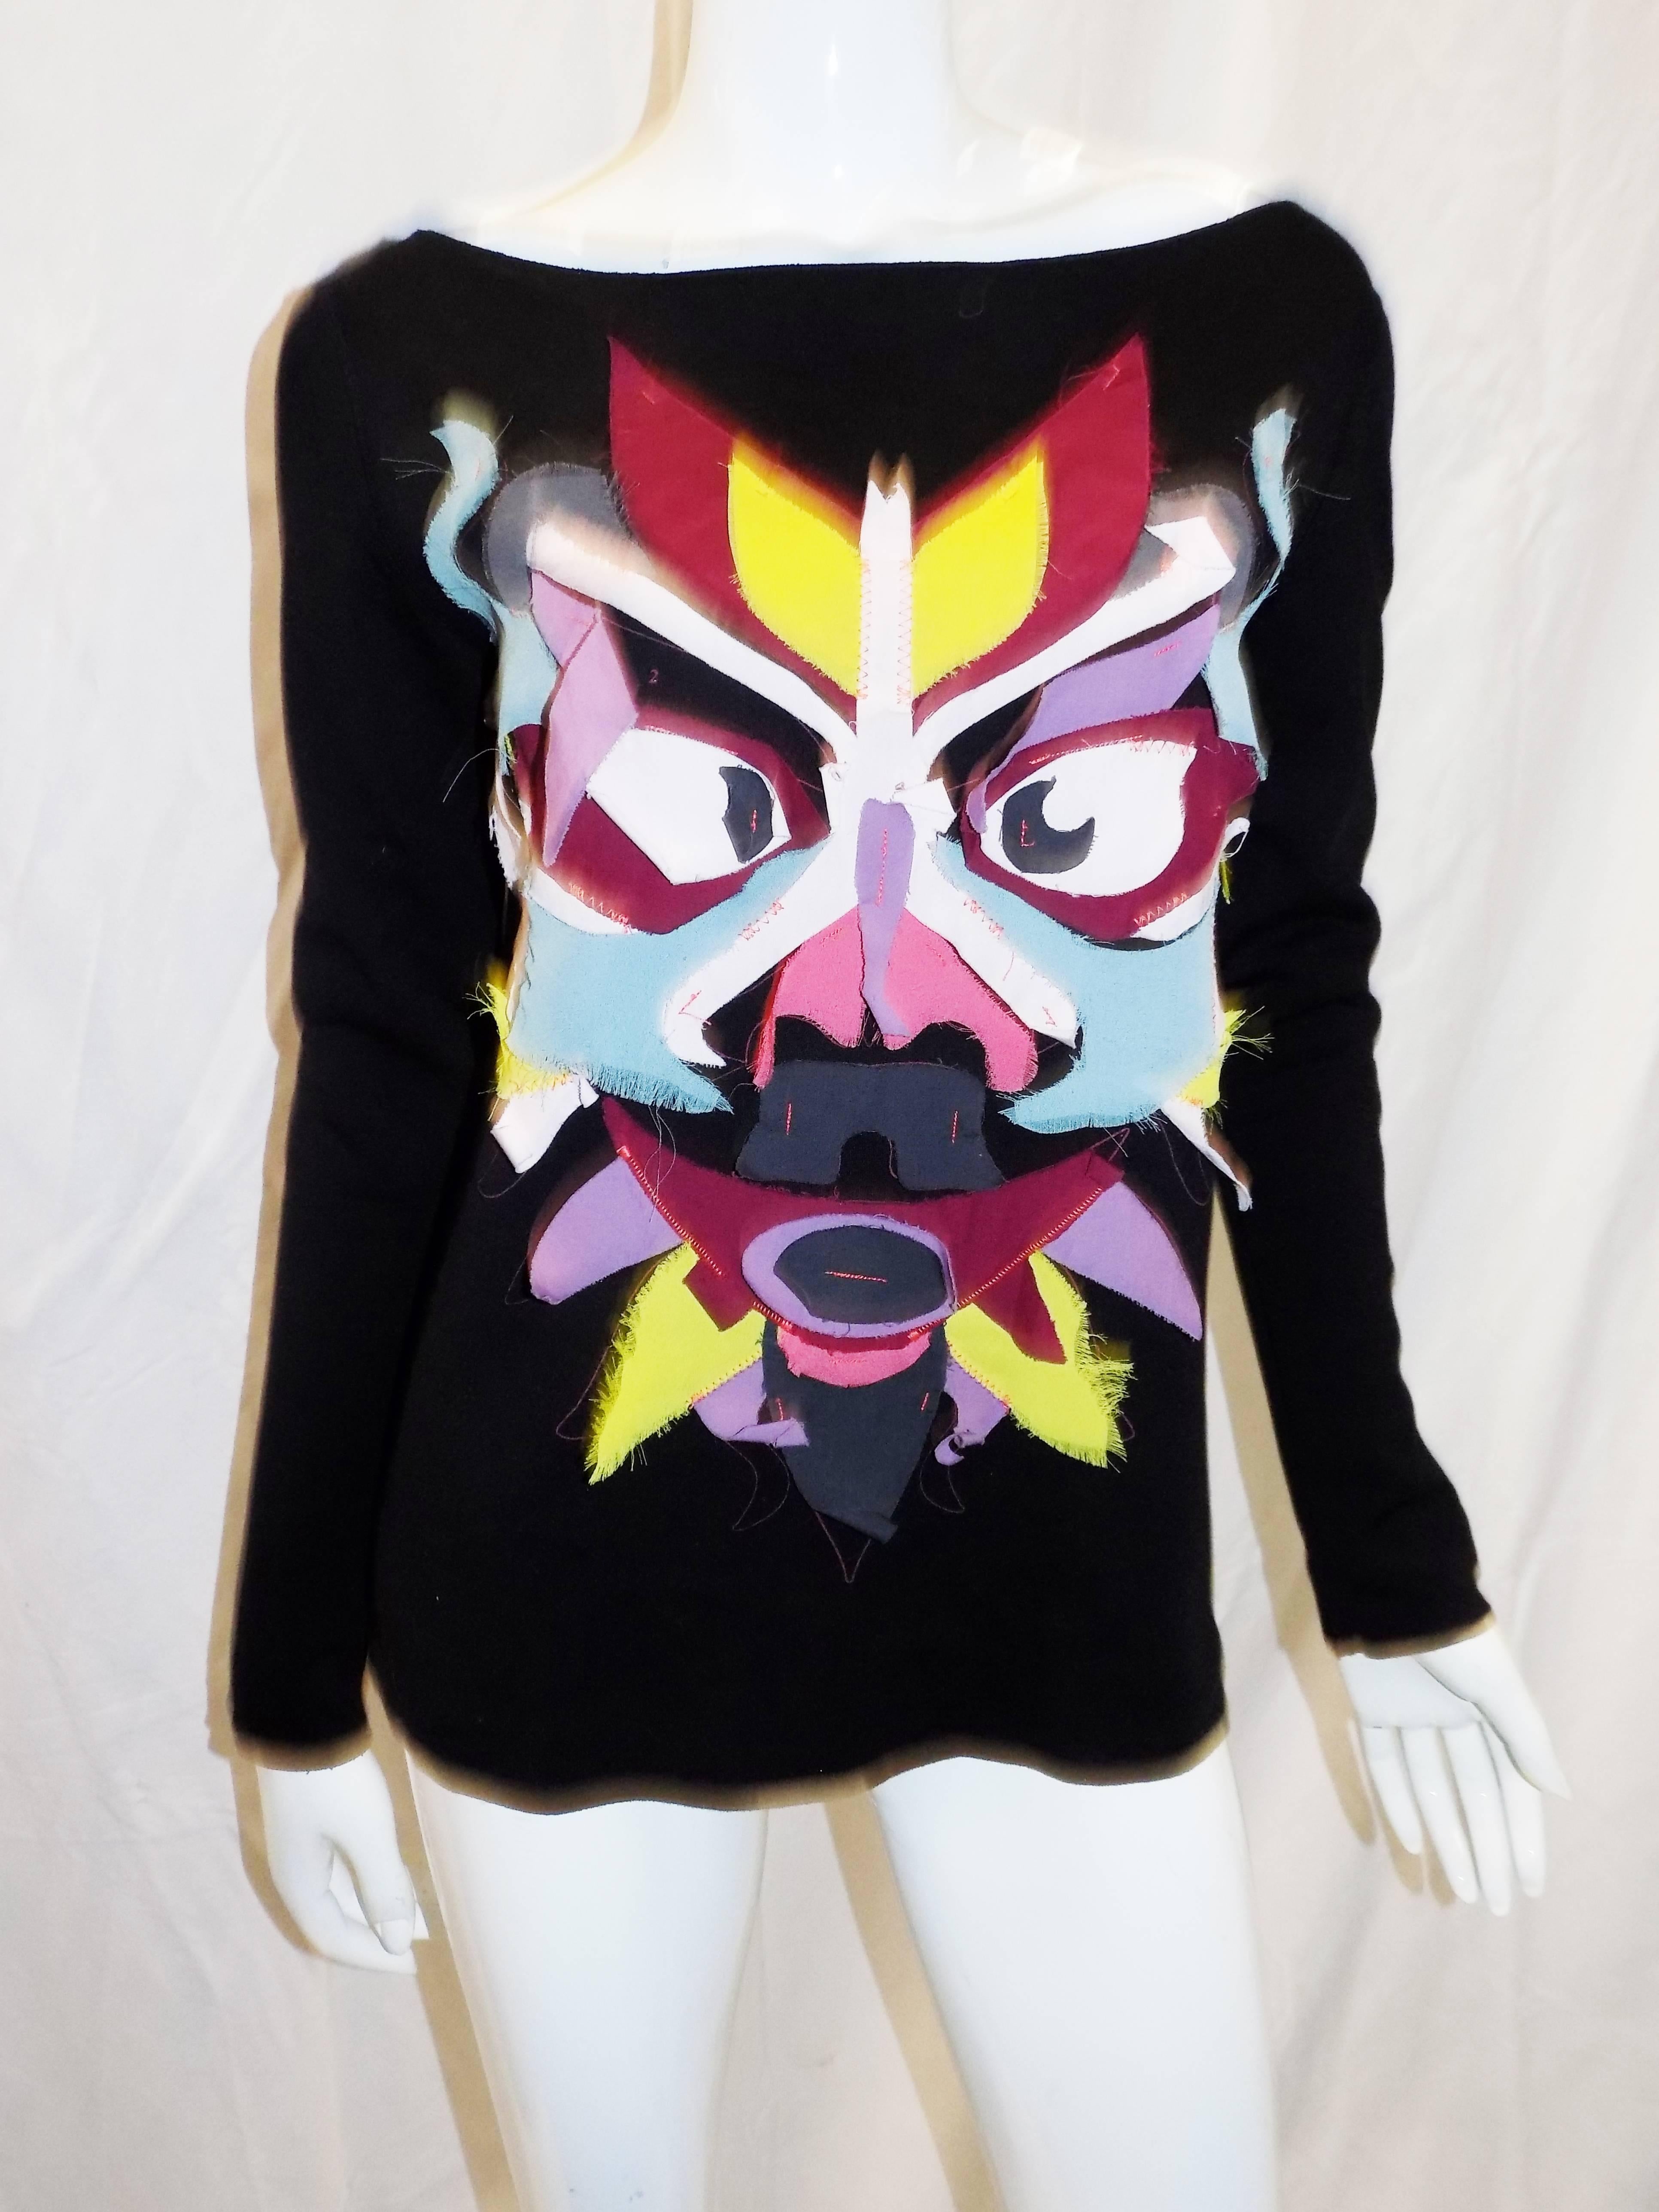 Never worn fabulous Kenzo heavy cotton blend top / sweater. Baby soft fabric, boat neckline with spectacular hand made patchwork Totem at the front. Every piece was cut  out of different fabric and sewn  to the top.  Measurements are bust 38